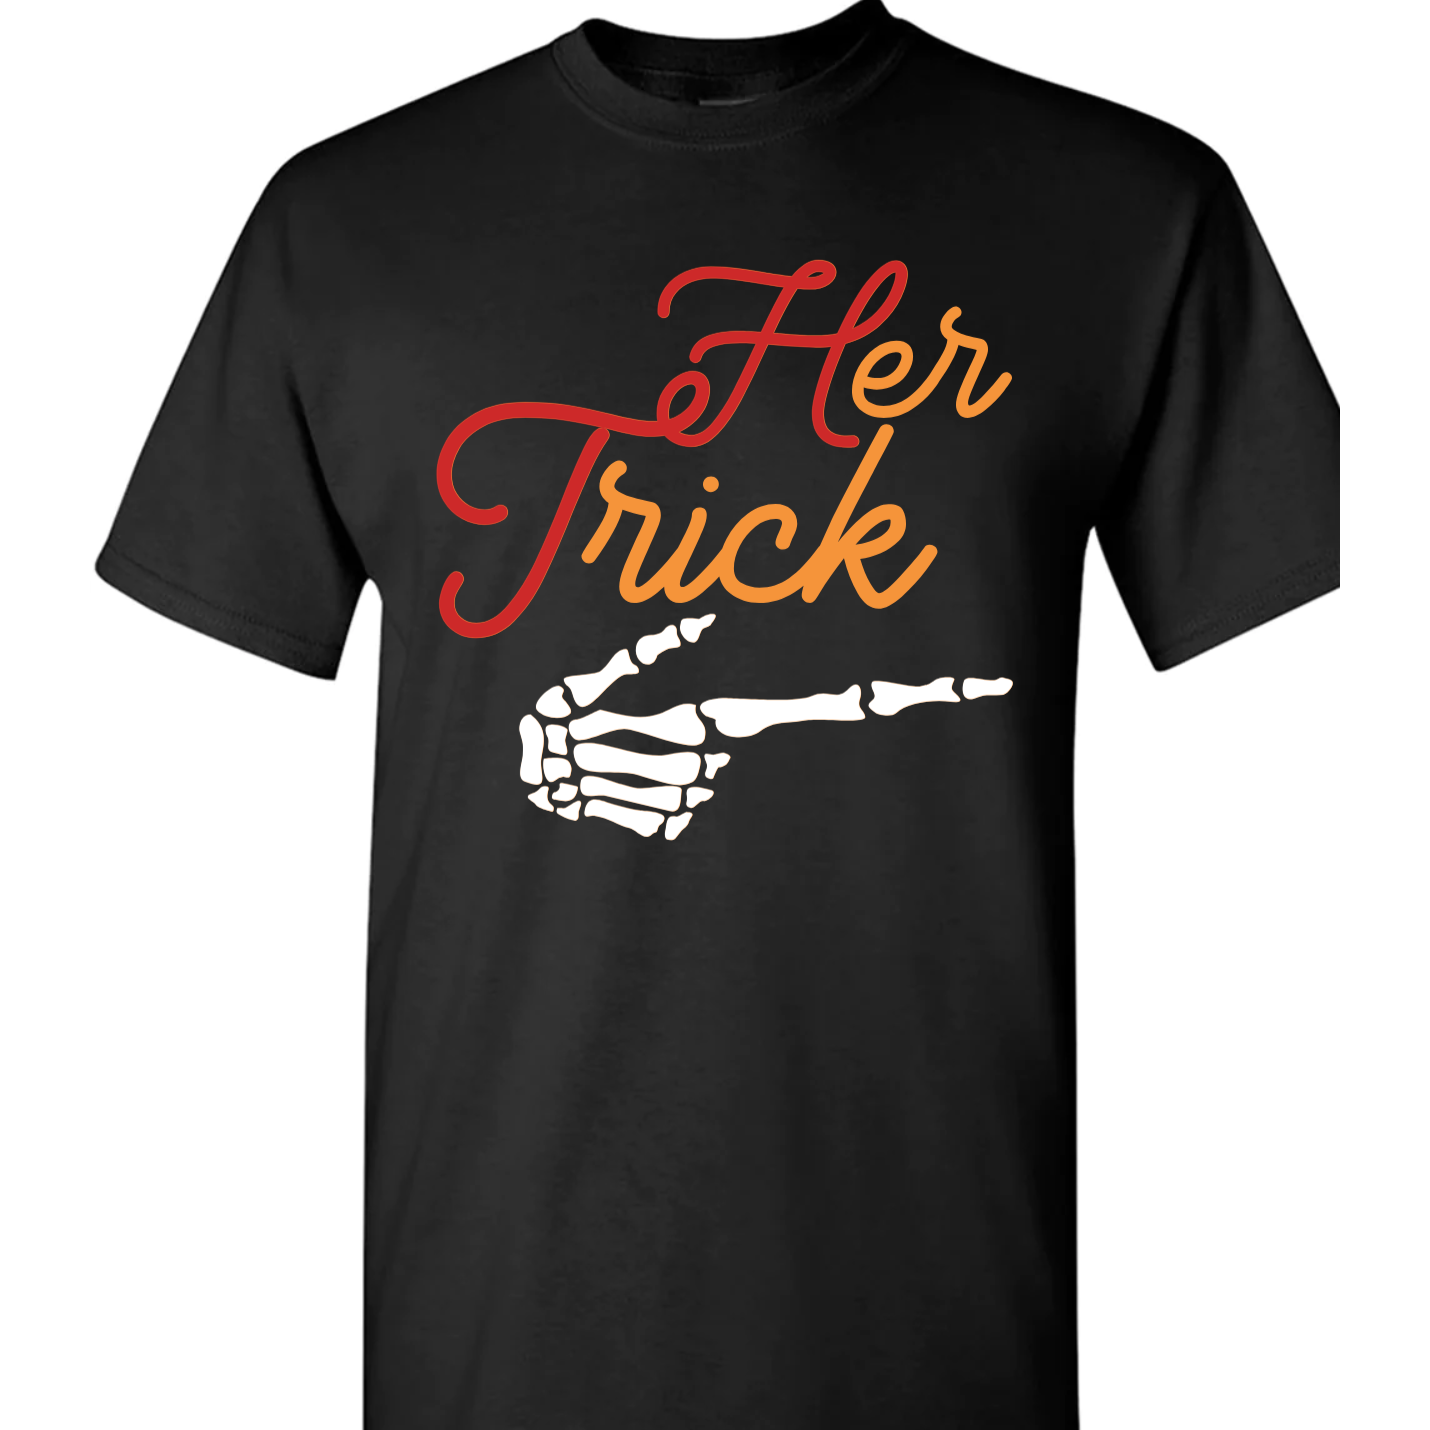 Halloween Couples Her Trick/His Treat Vinyl Graphic for Shirts